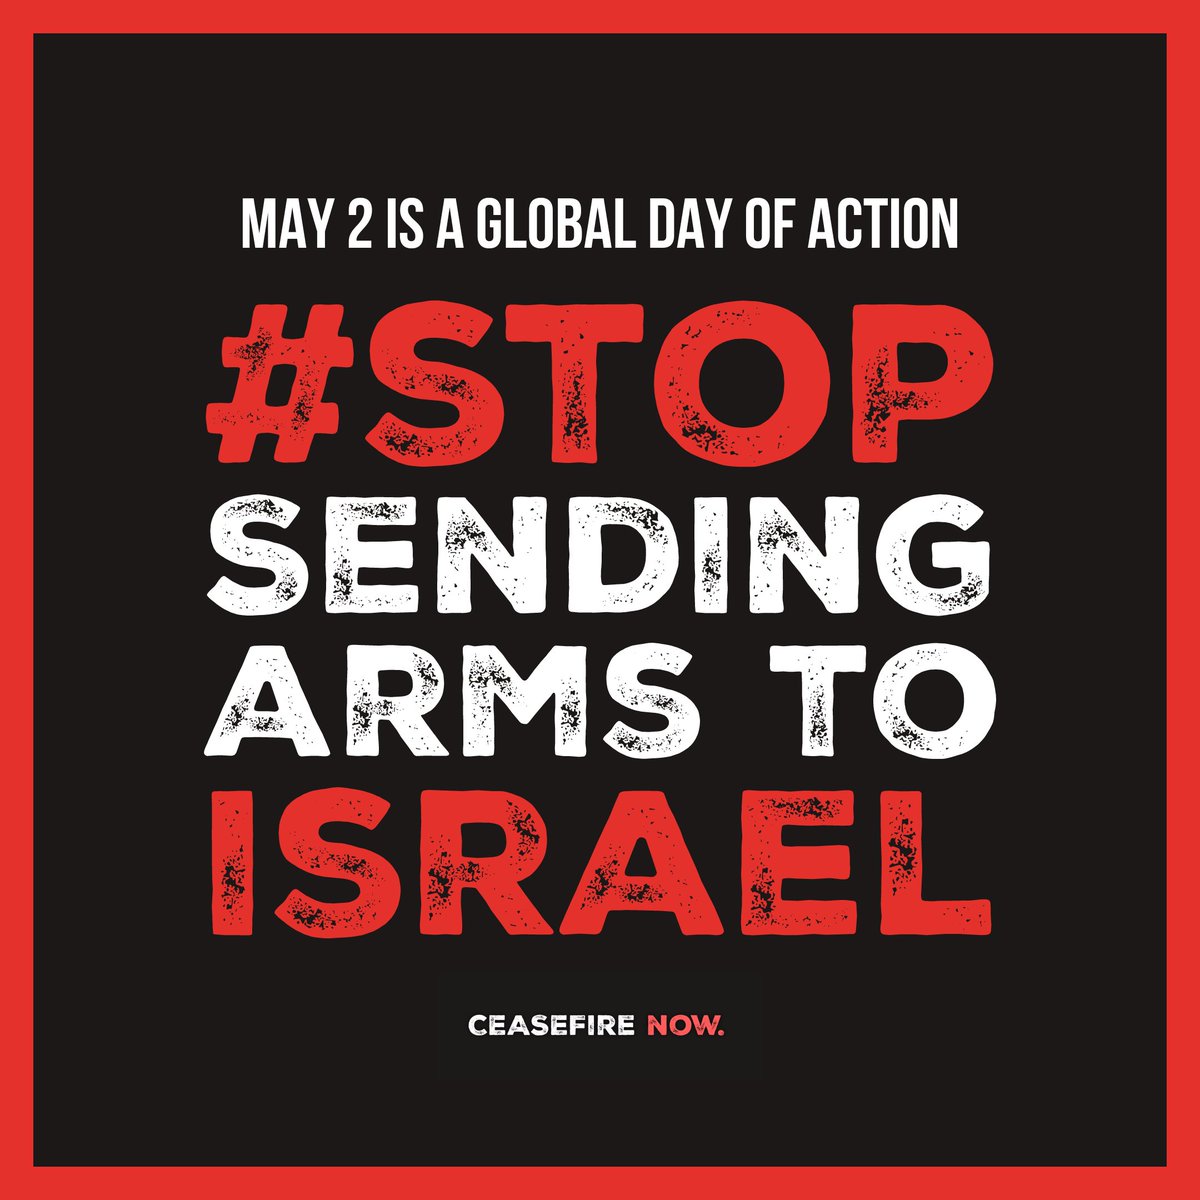 🛑Arms sales and transfers to Israel MUST STOP and steps towards an immediate sustained ceasefire must begin. End the human suffering in Gaza now! #StopSendingArms #CeasefireNOW @nowceasefire